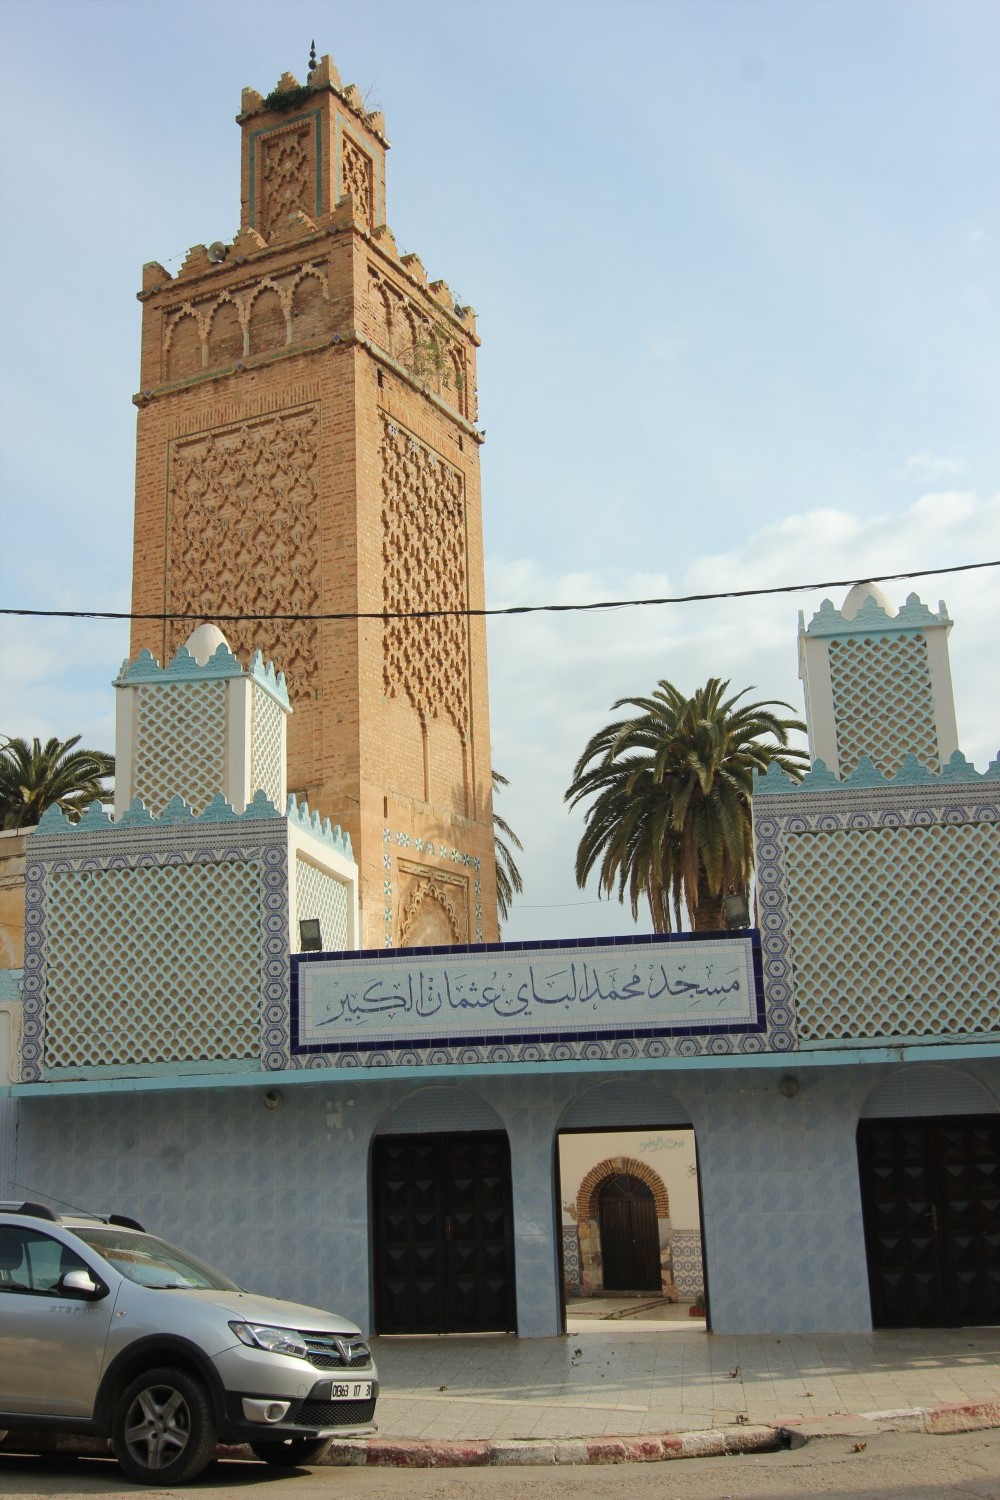 View of the main entrance showing the minaret